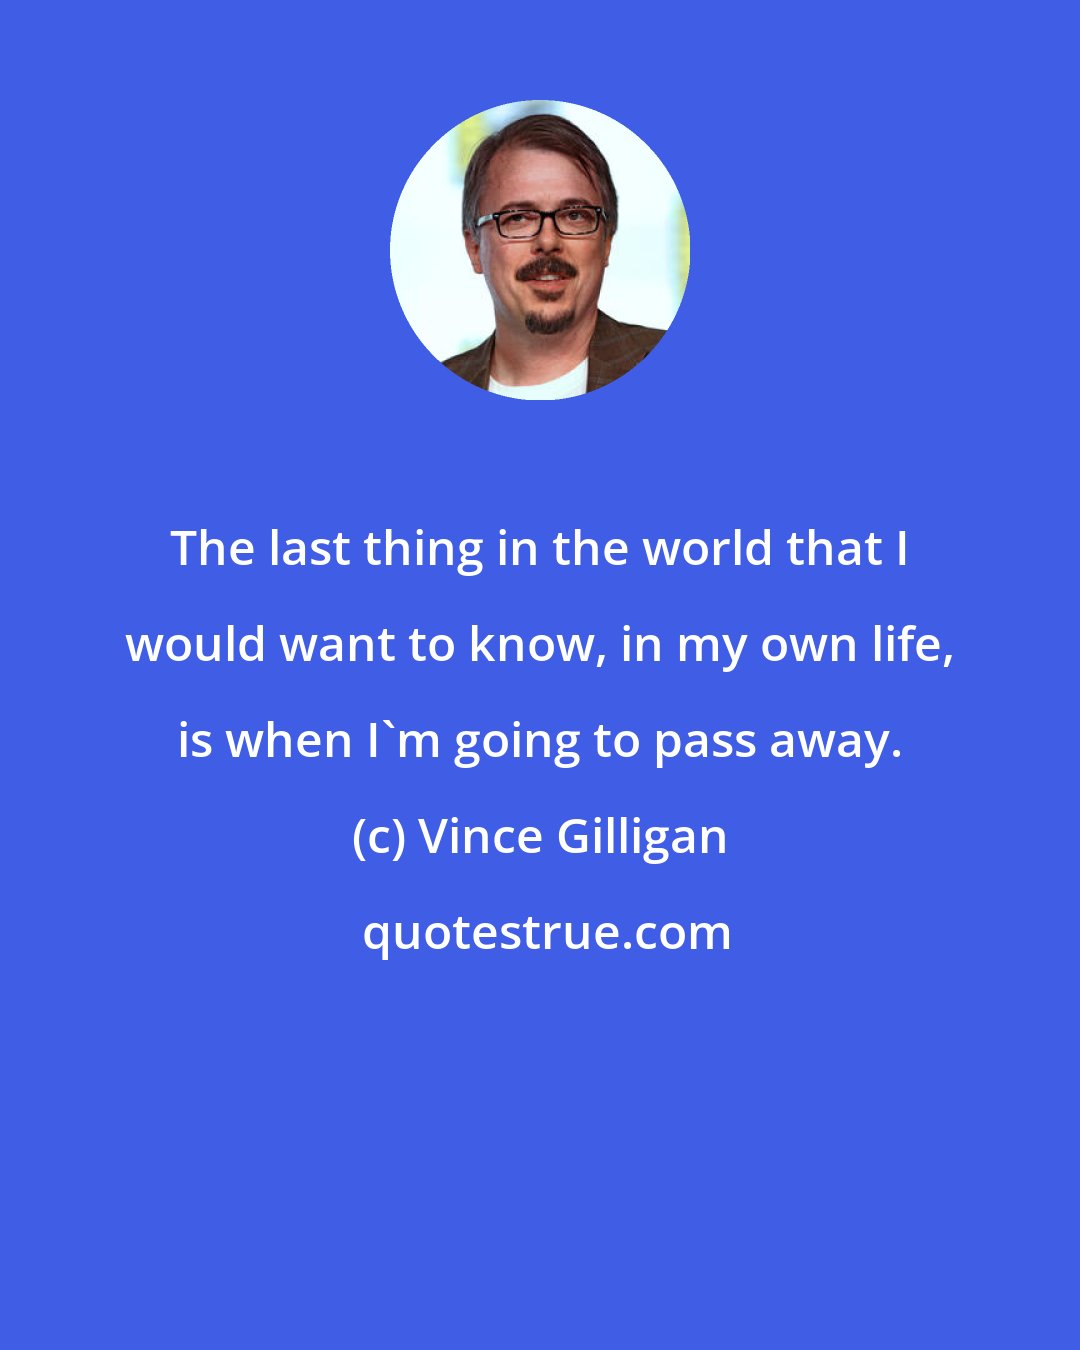 Vince Gilligan: The last thing in the world that I would want to know, in my own life, is when I'm going to pass away.